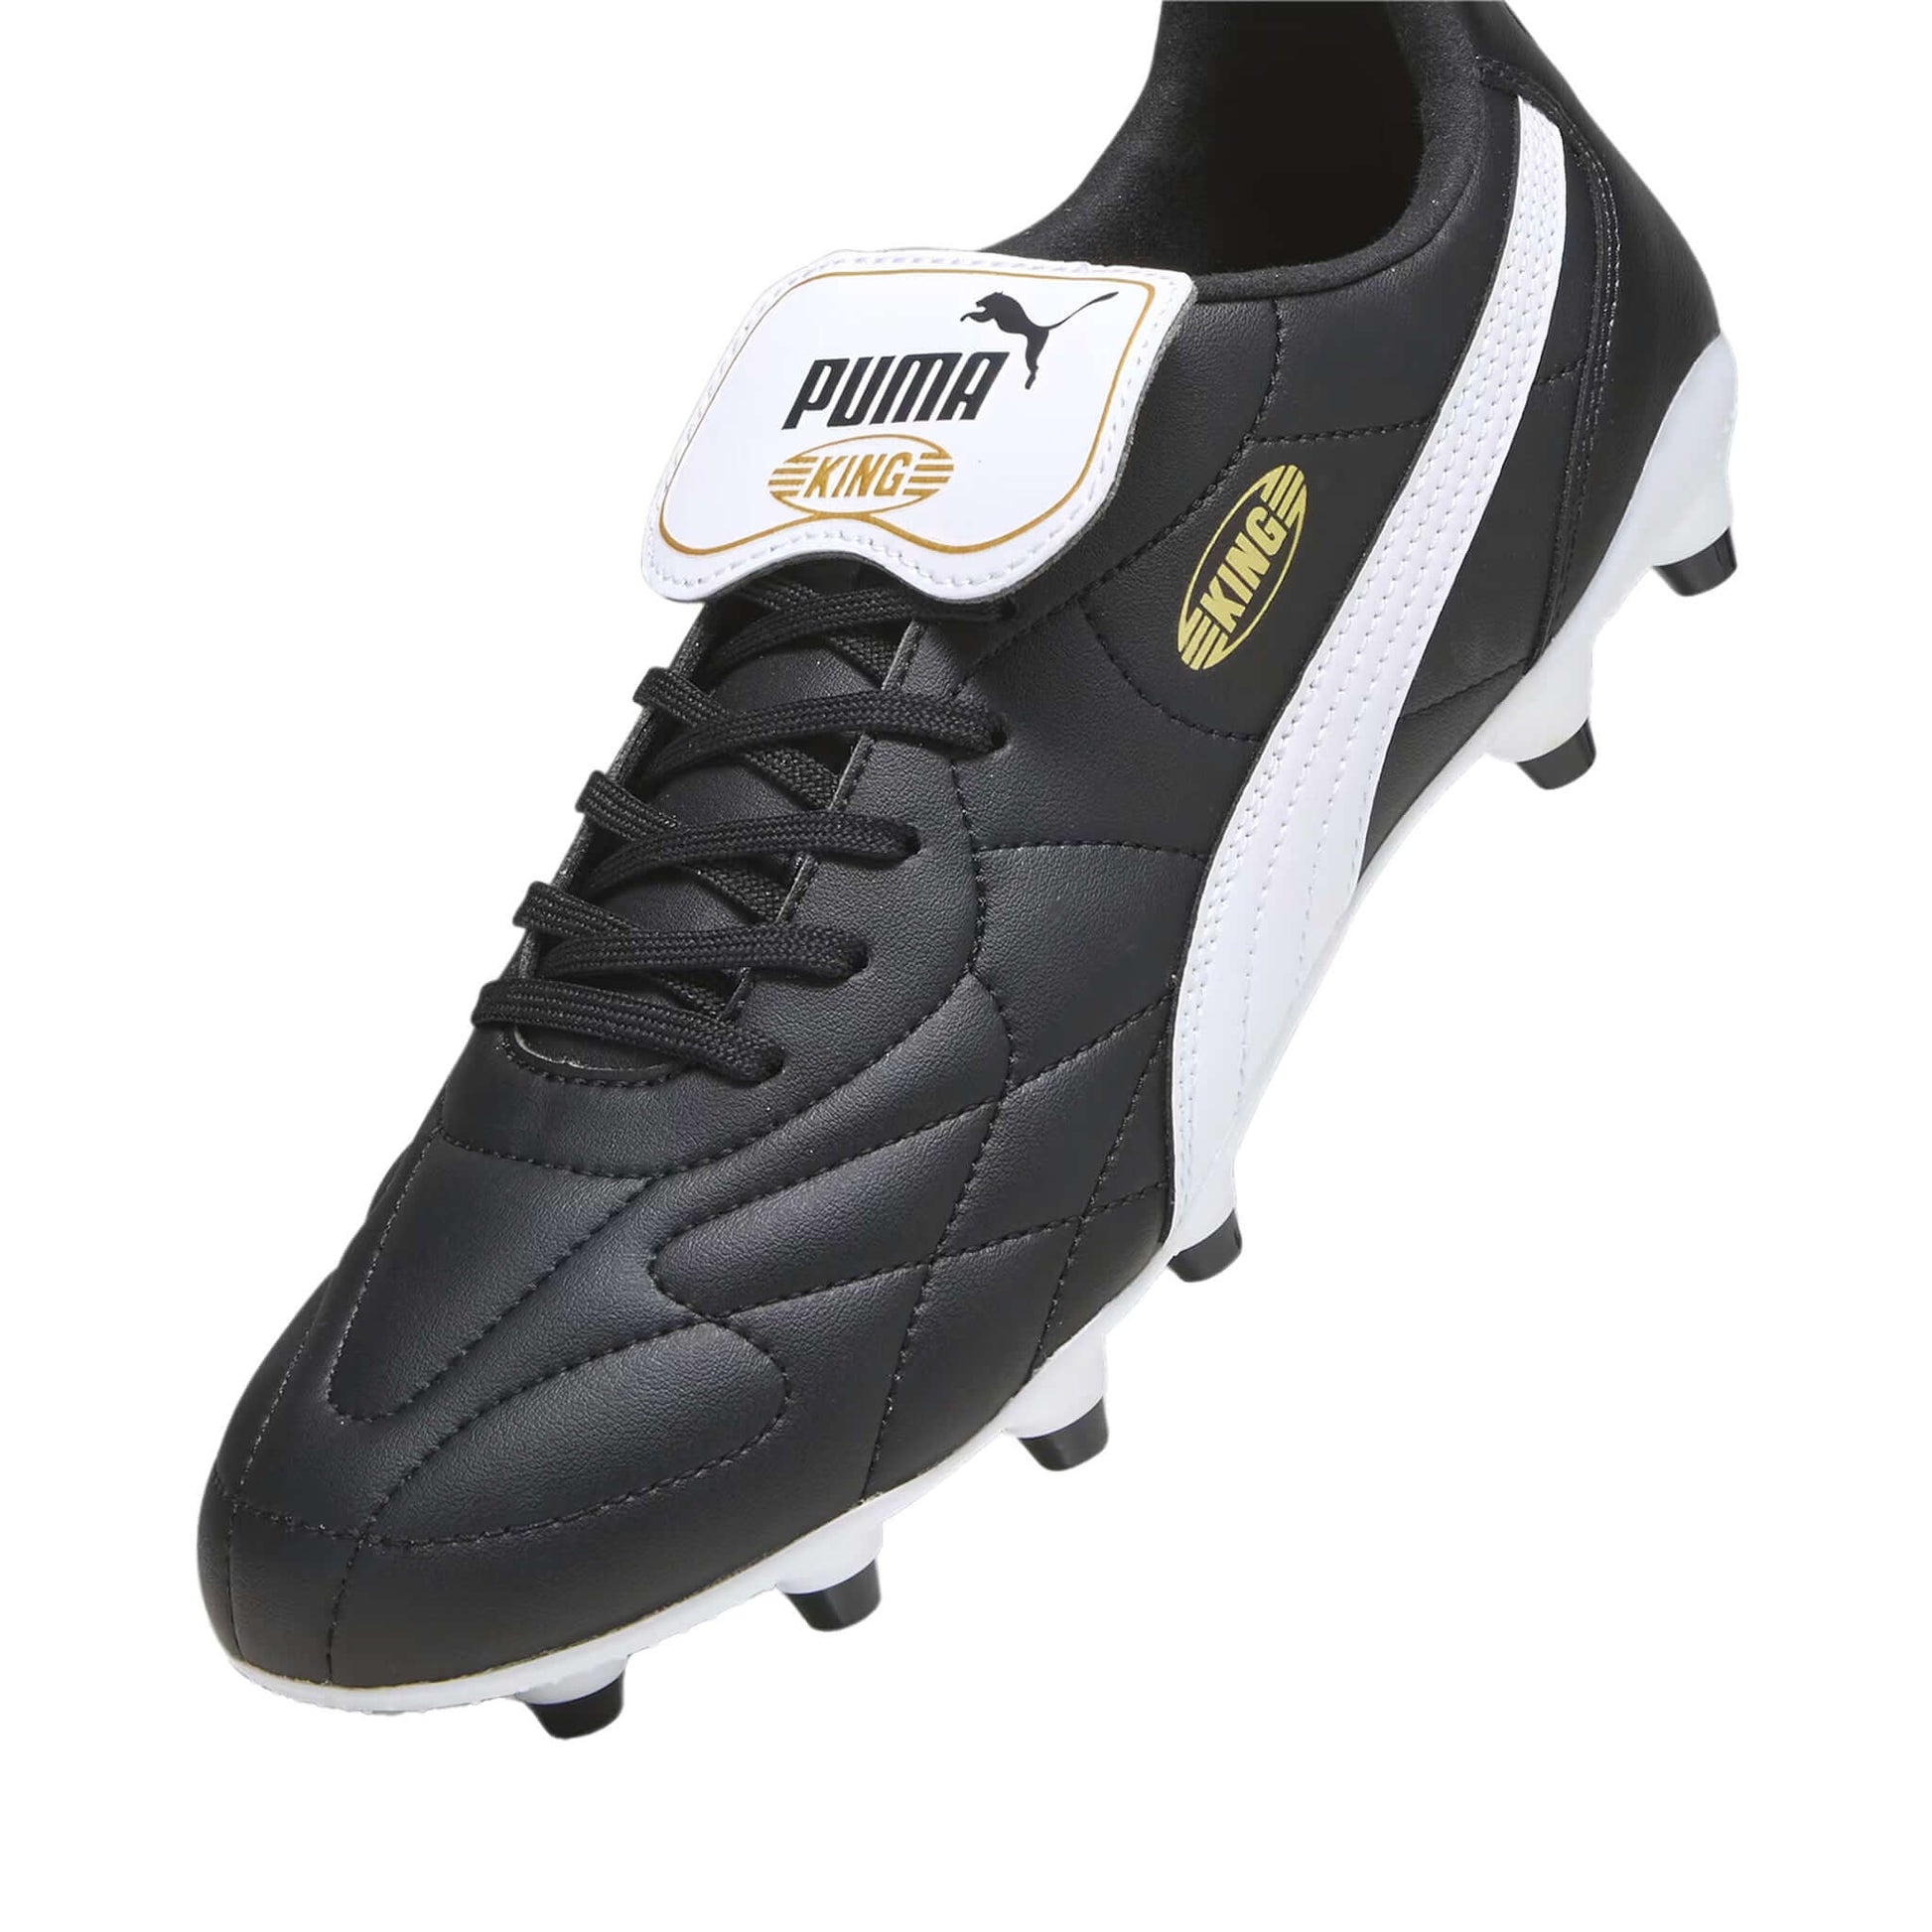 King Top Firm Ground & Artificial Grass Cleats | EvangelistaSports.com | Canada's Premiere Soccer Store